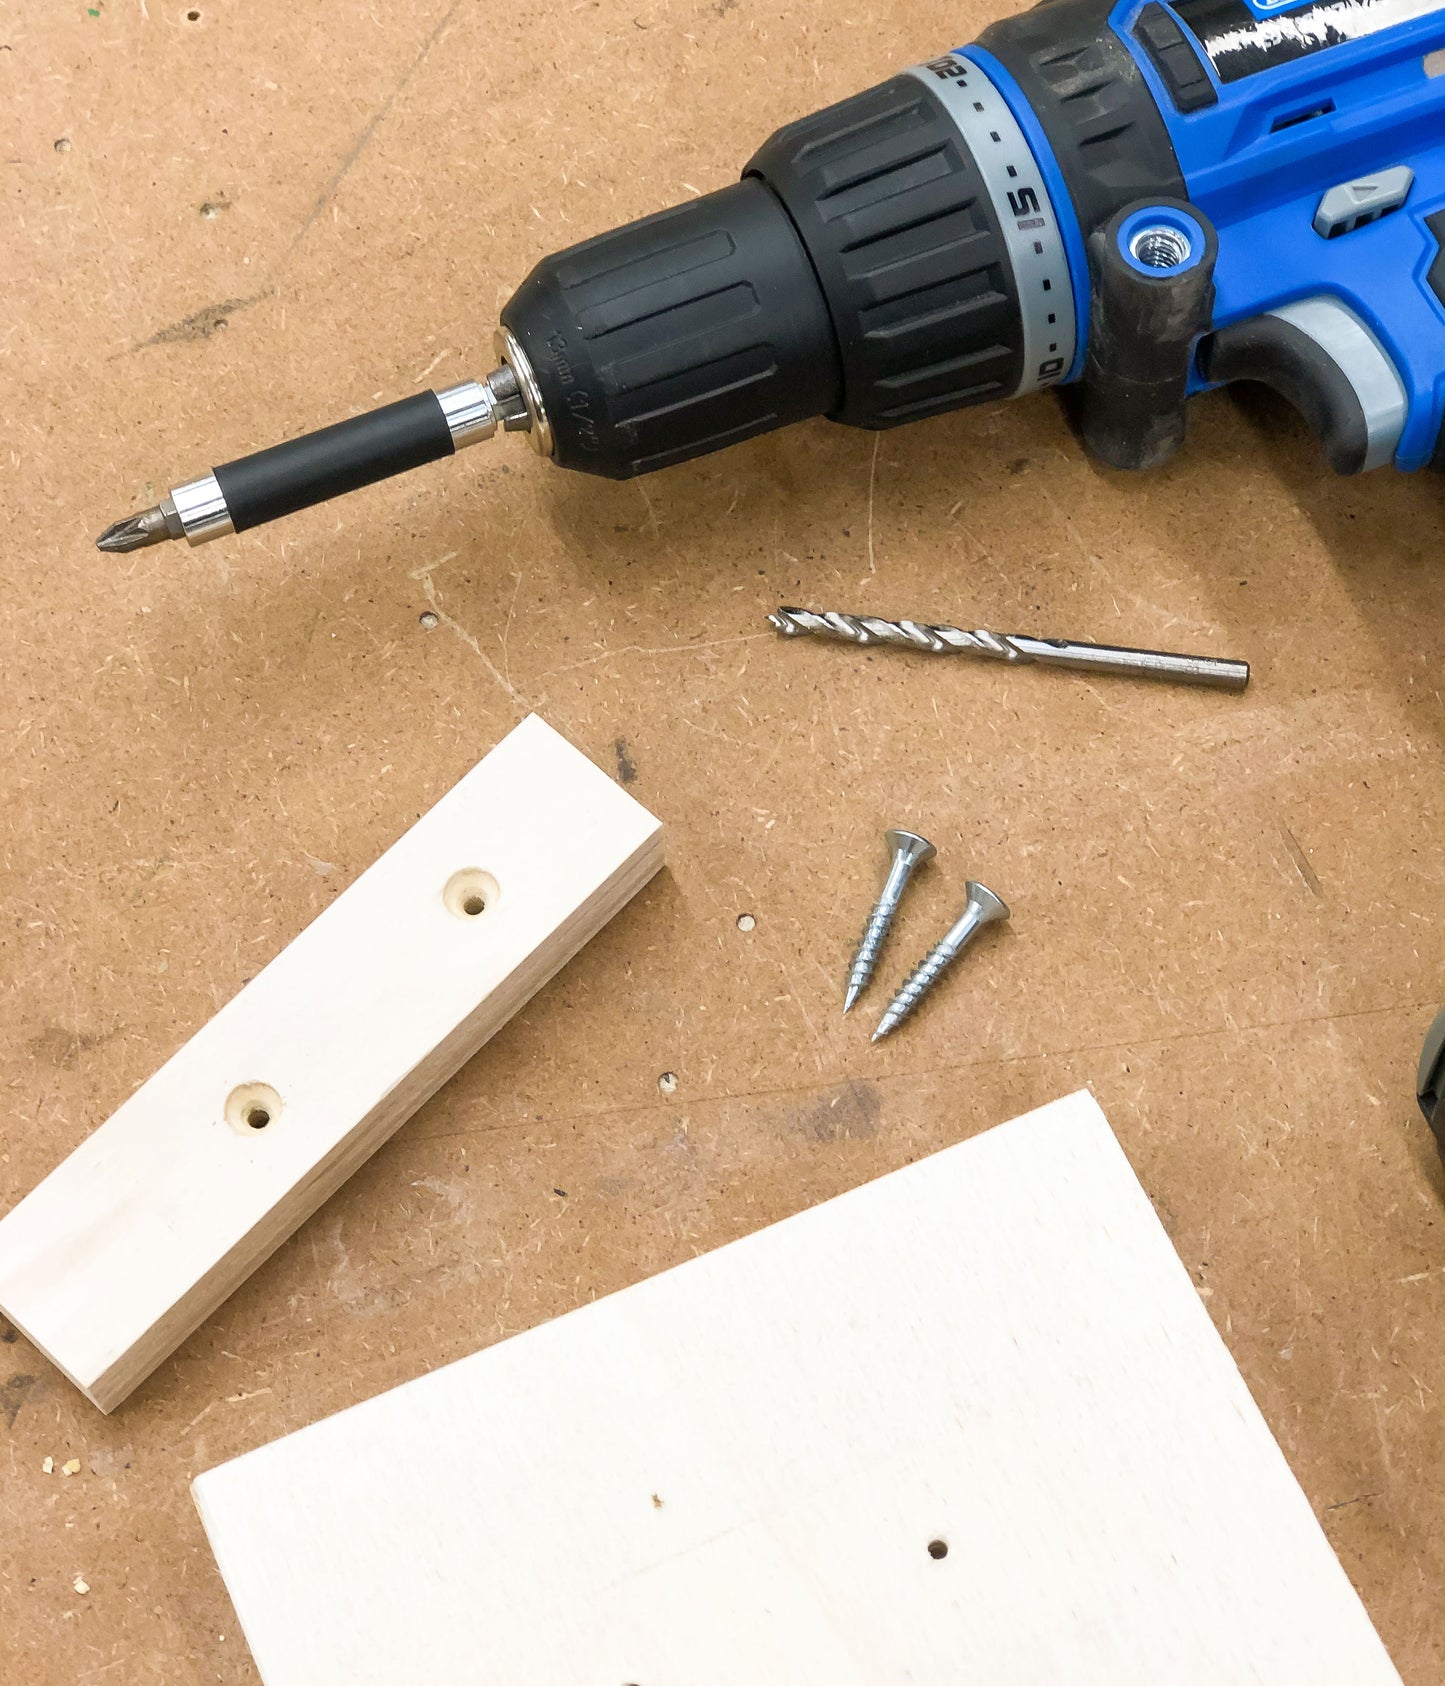 Introduction to DIY skills course for teens and tweens. Learn how to use a drill and saw